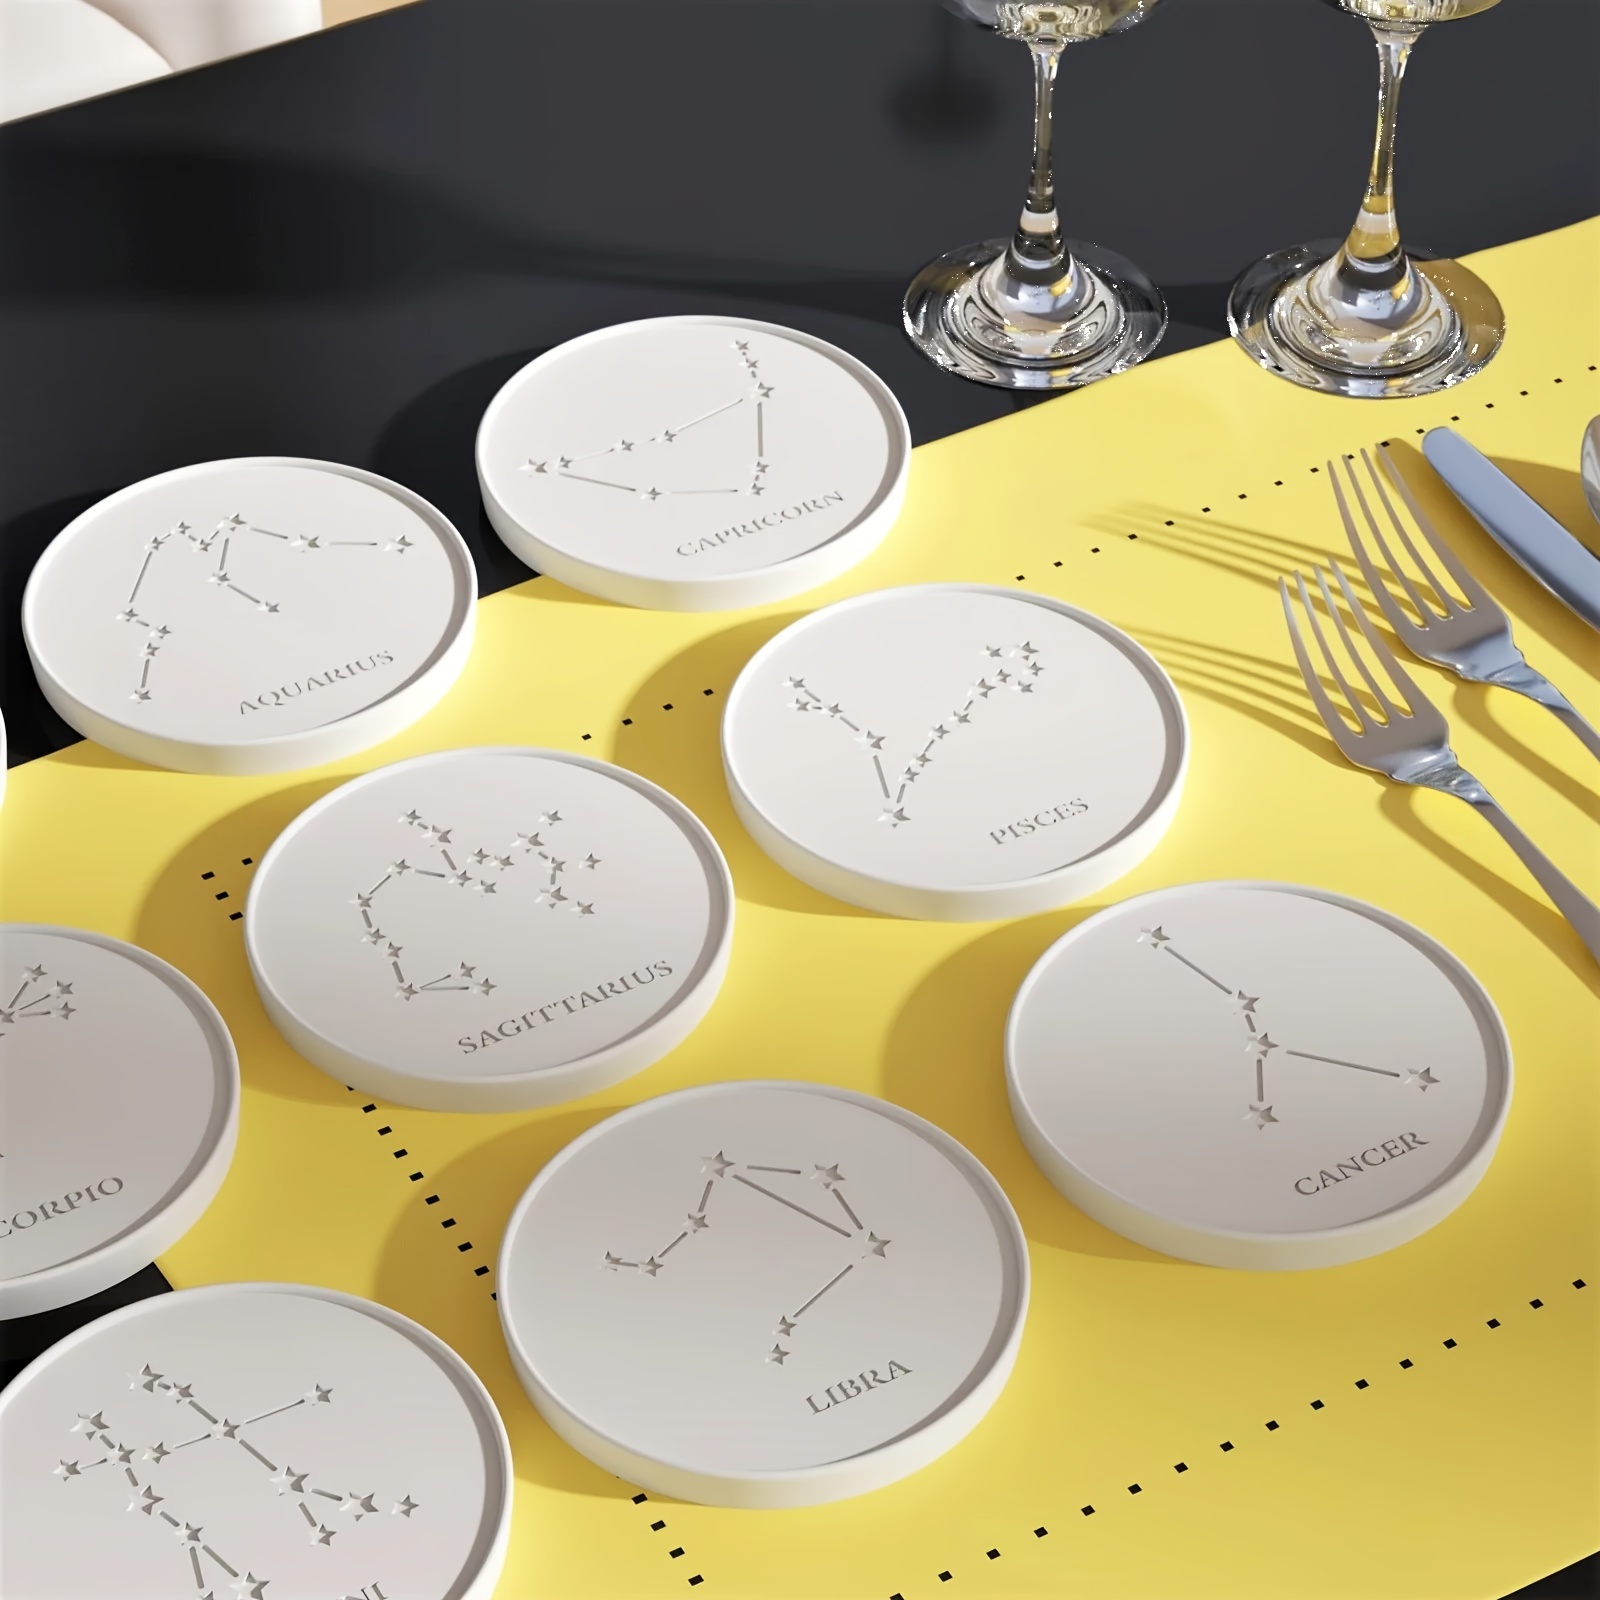 

13 Pcs Zodiac Sign Coaster Mold Set, Silicone Resin Epoxy Molds With Constellations, Round Concrete Coaster Casting For Diy Jewelry Making, Home Crafts & Decor